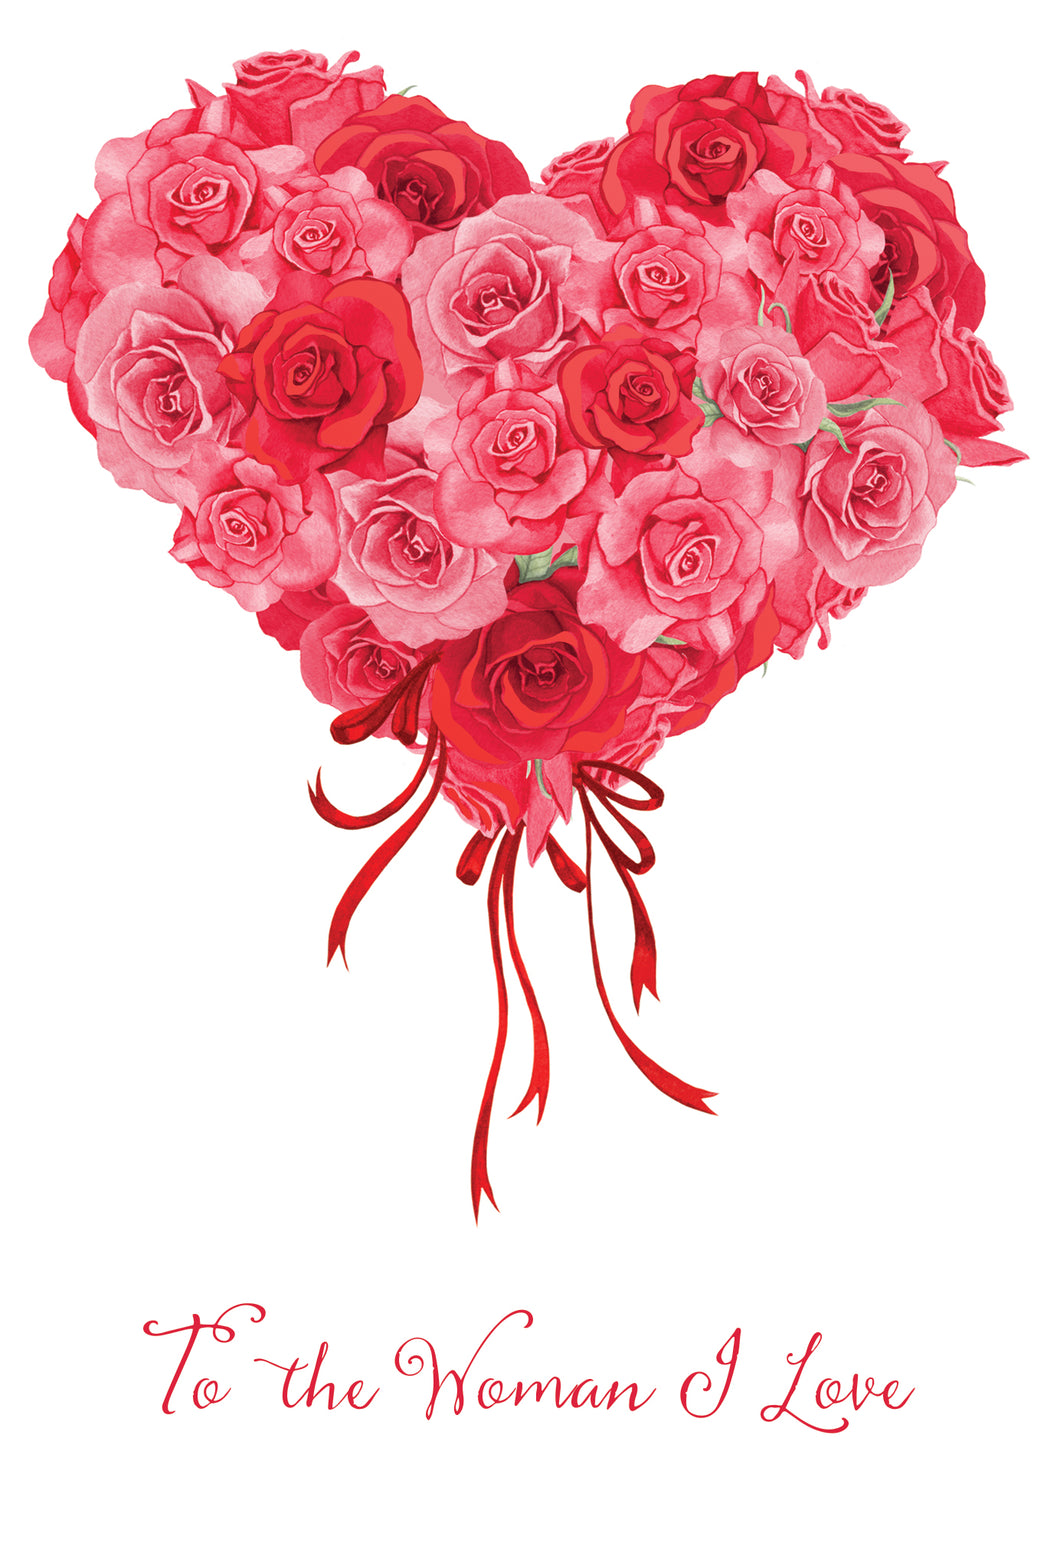 Heart Rose Bouquet Valentine's Card Woman I Love